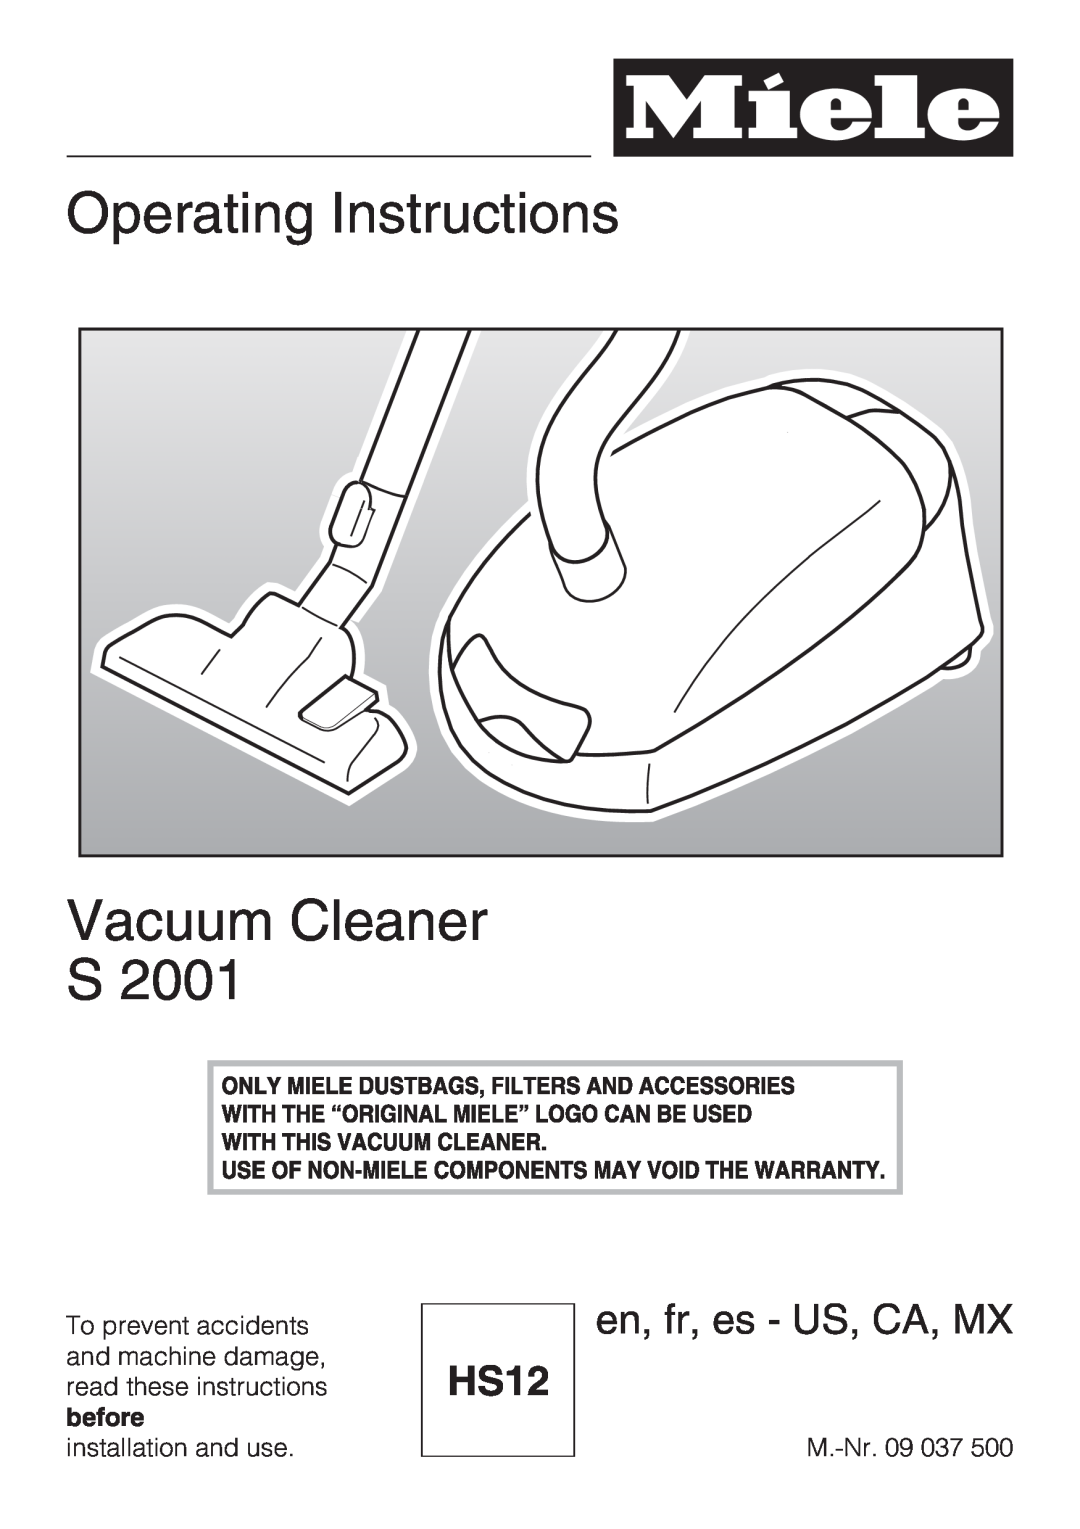 Miele S 2001 manual Operating Instructions Vacuum Cleaner S, HS12, en - US 